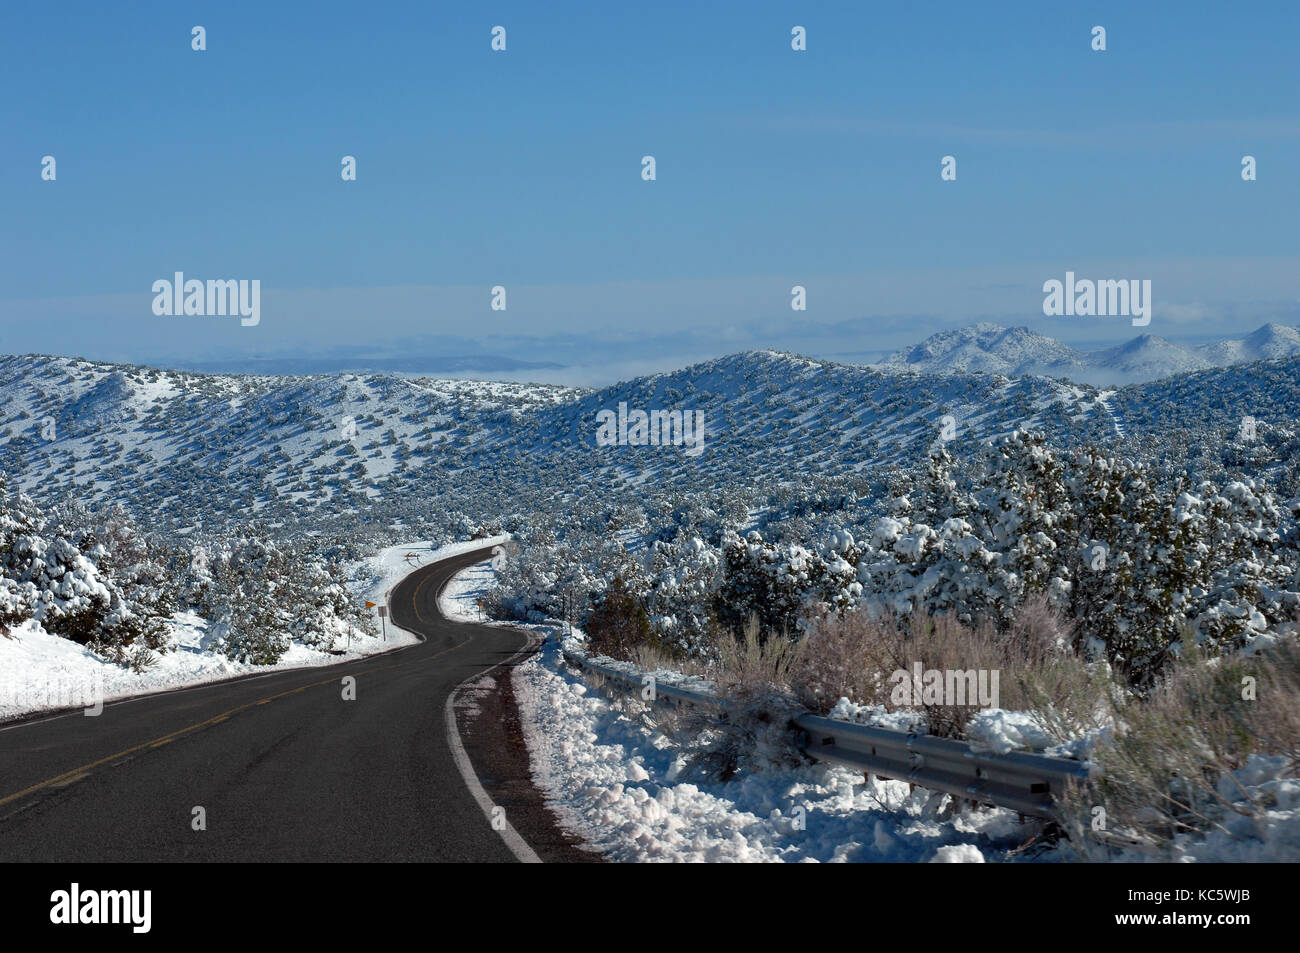 S shaped curving road disappears into the mountaijns of central New Mexico.  Snow covers mountains and trees.  Blue sky. Stock Photo